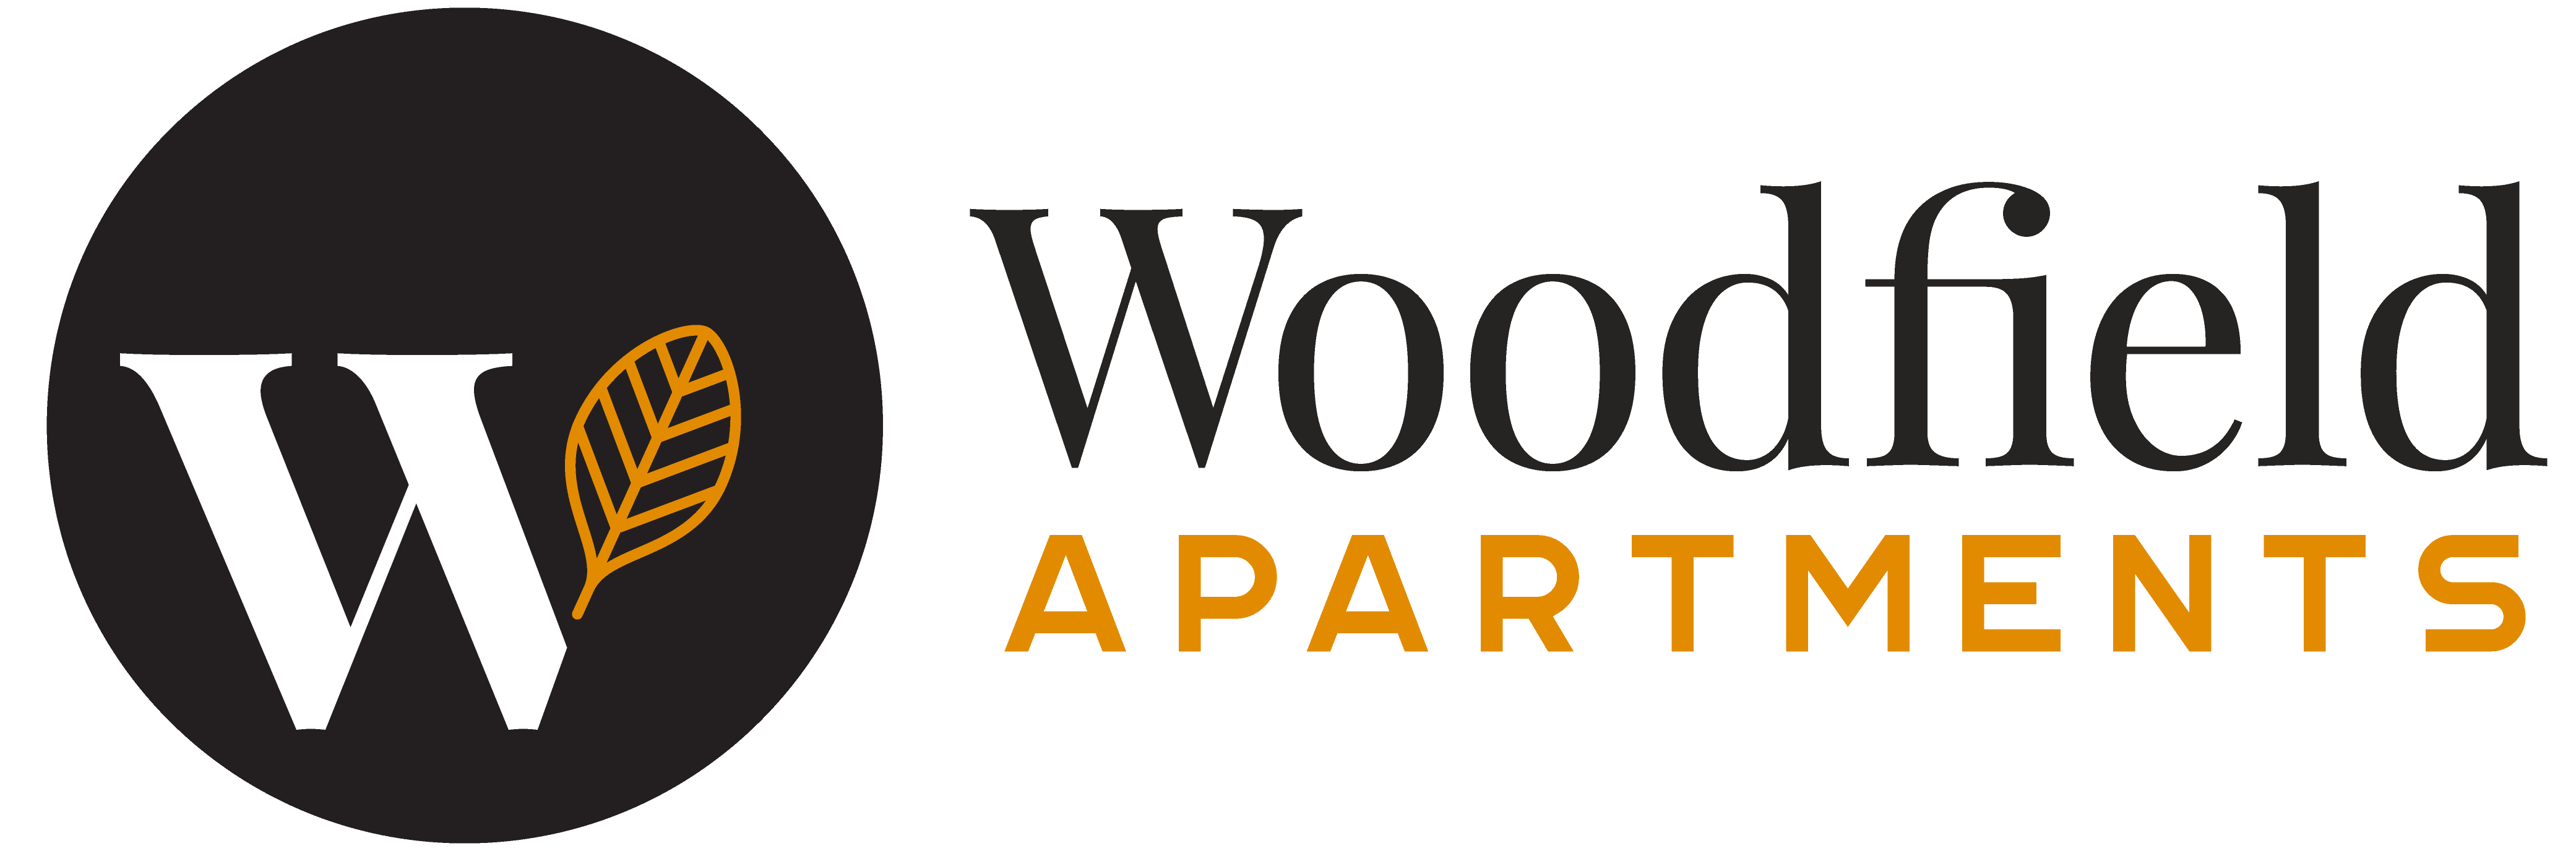 Woodfield Apartments